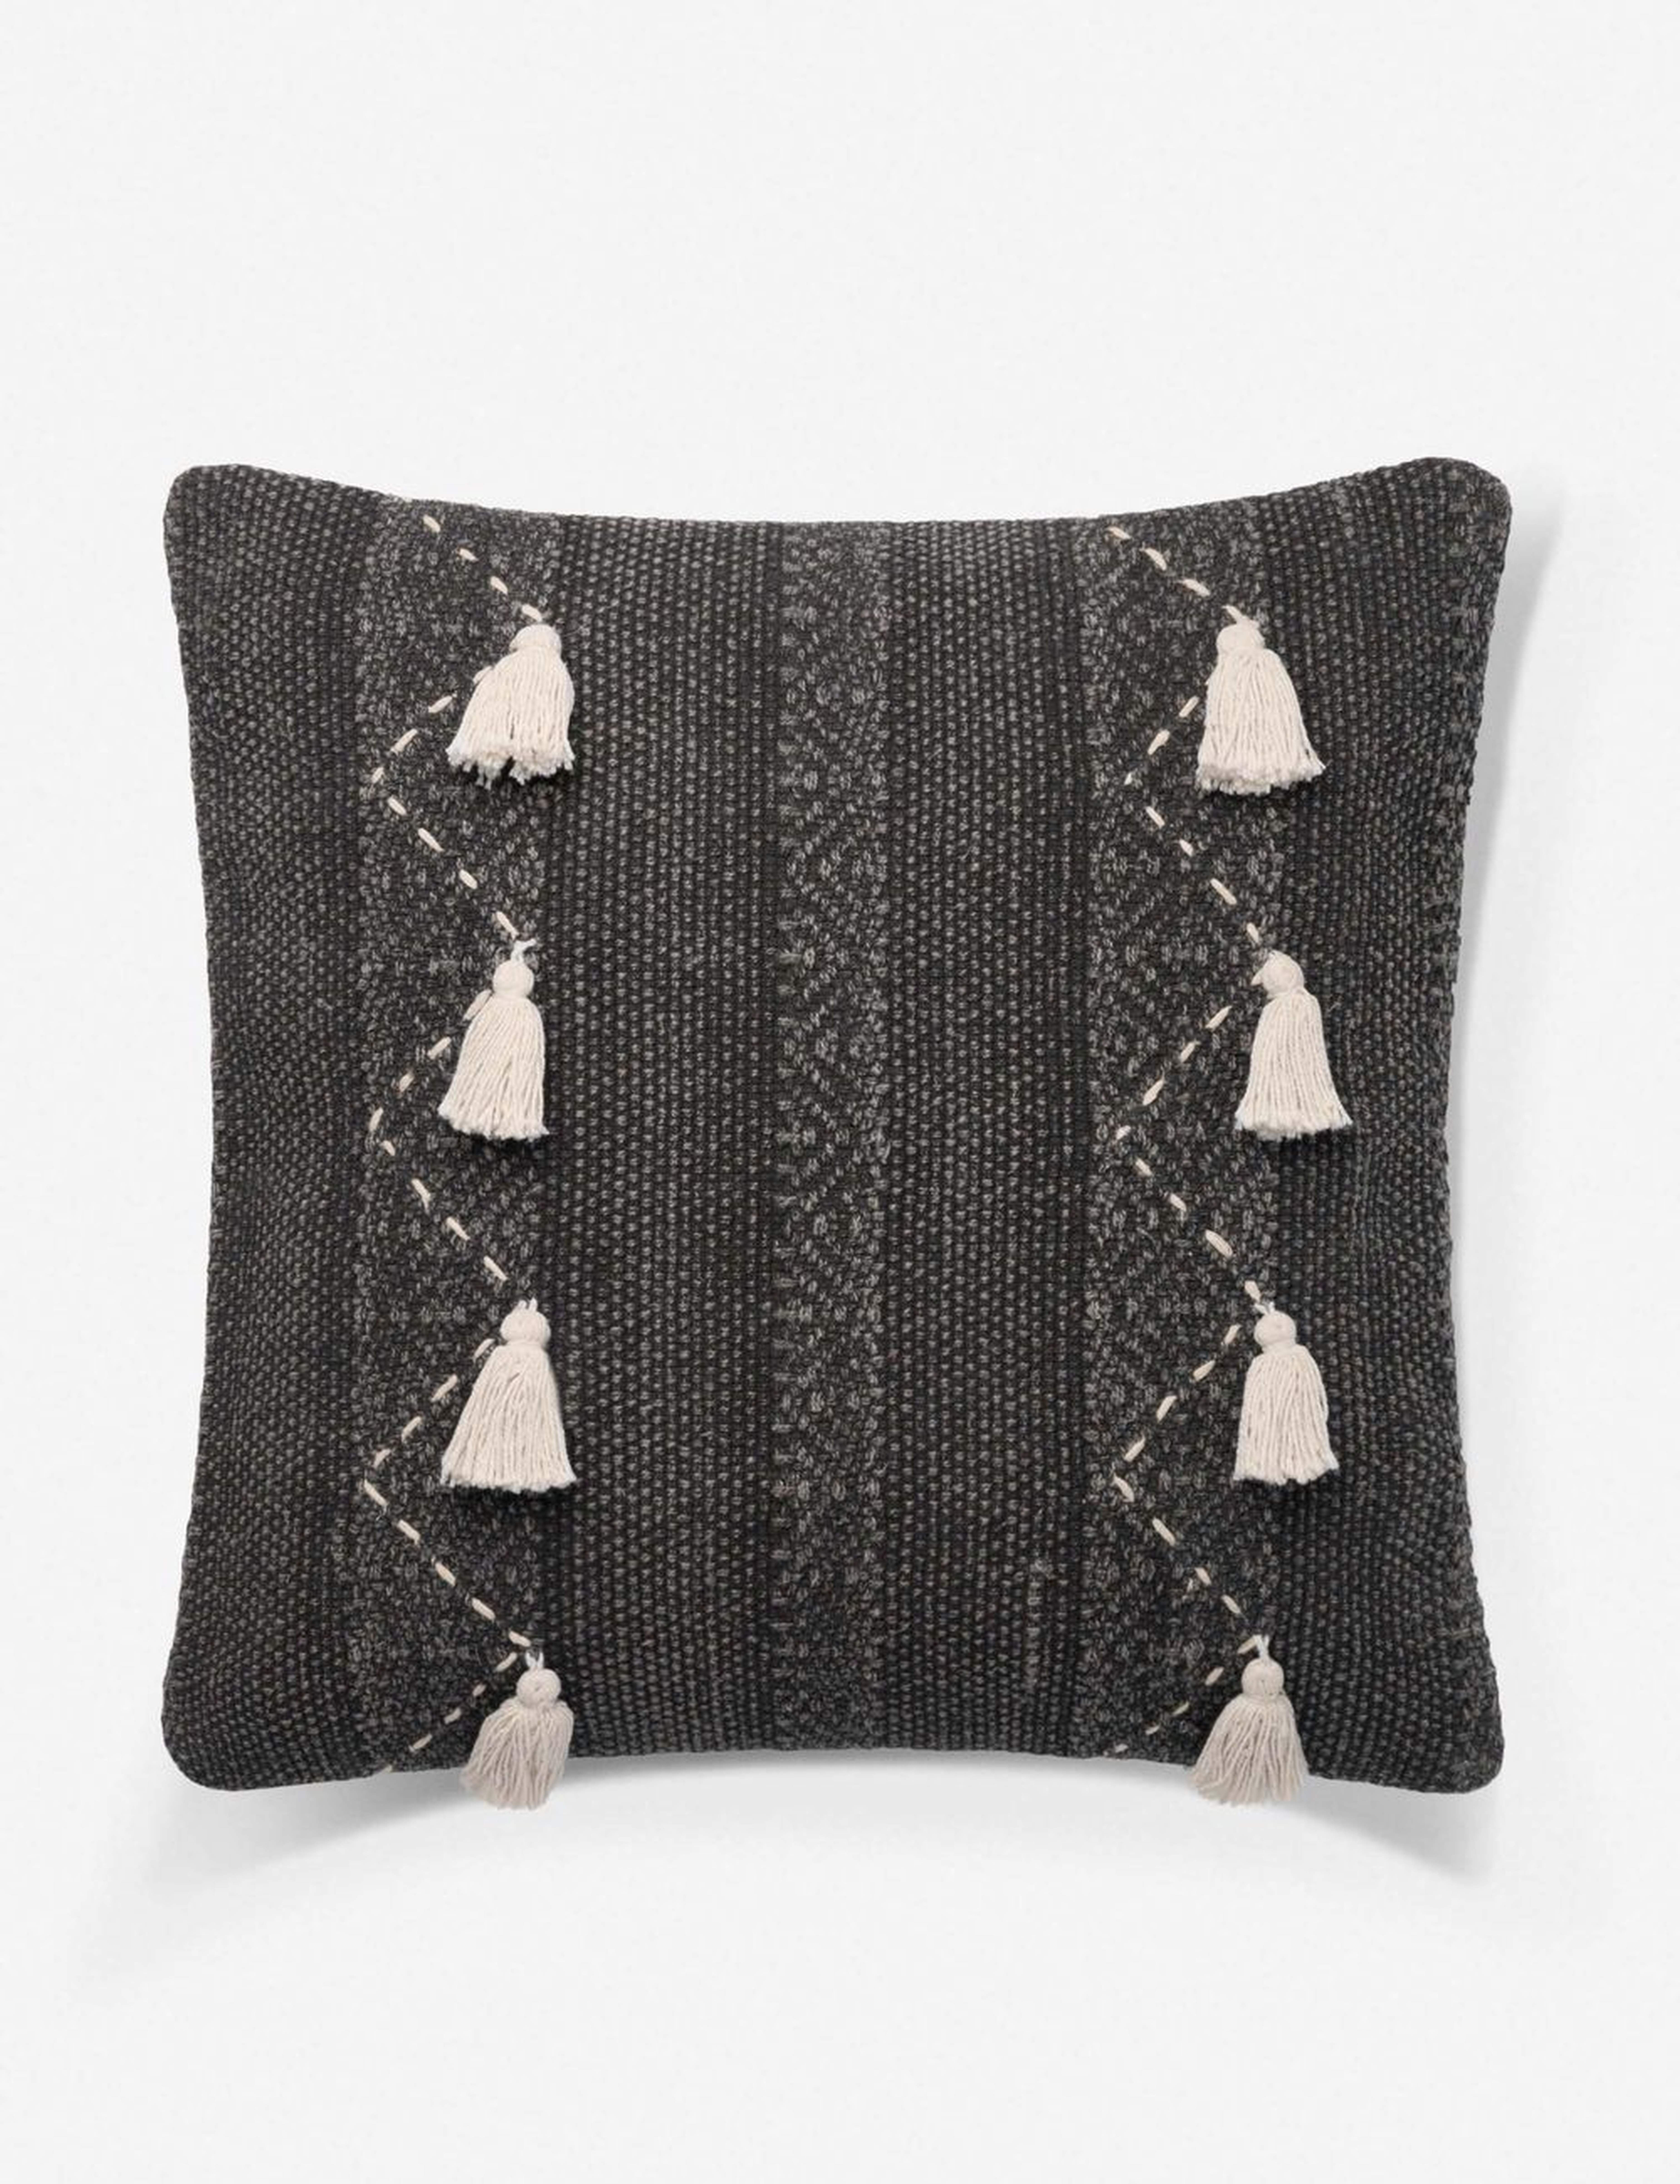 Pantina Pillow, Charcoal and Natural, ED Ellen DeGeneres Crafted by Loloi - Lulu and Georgia